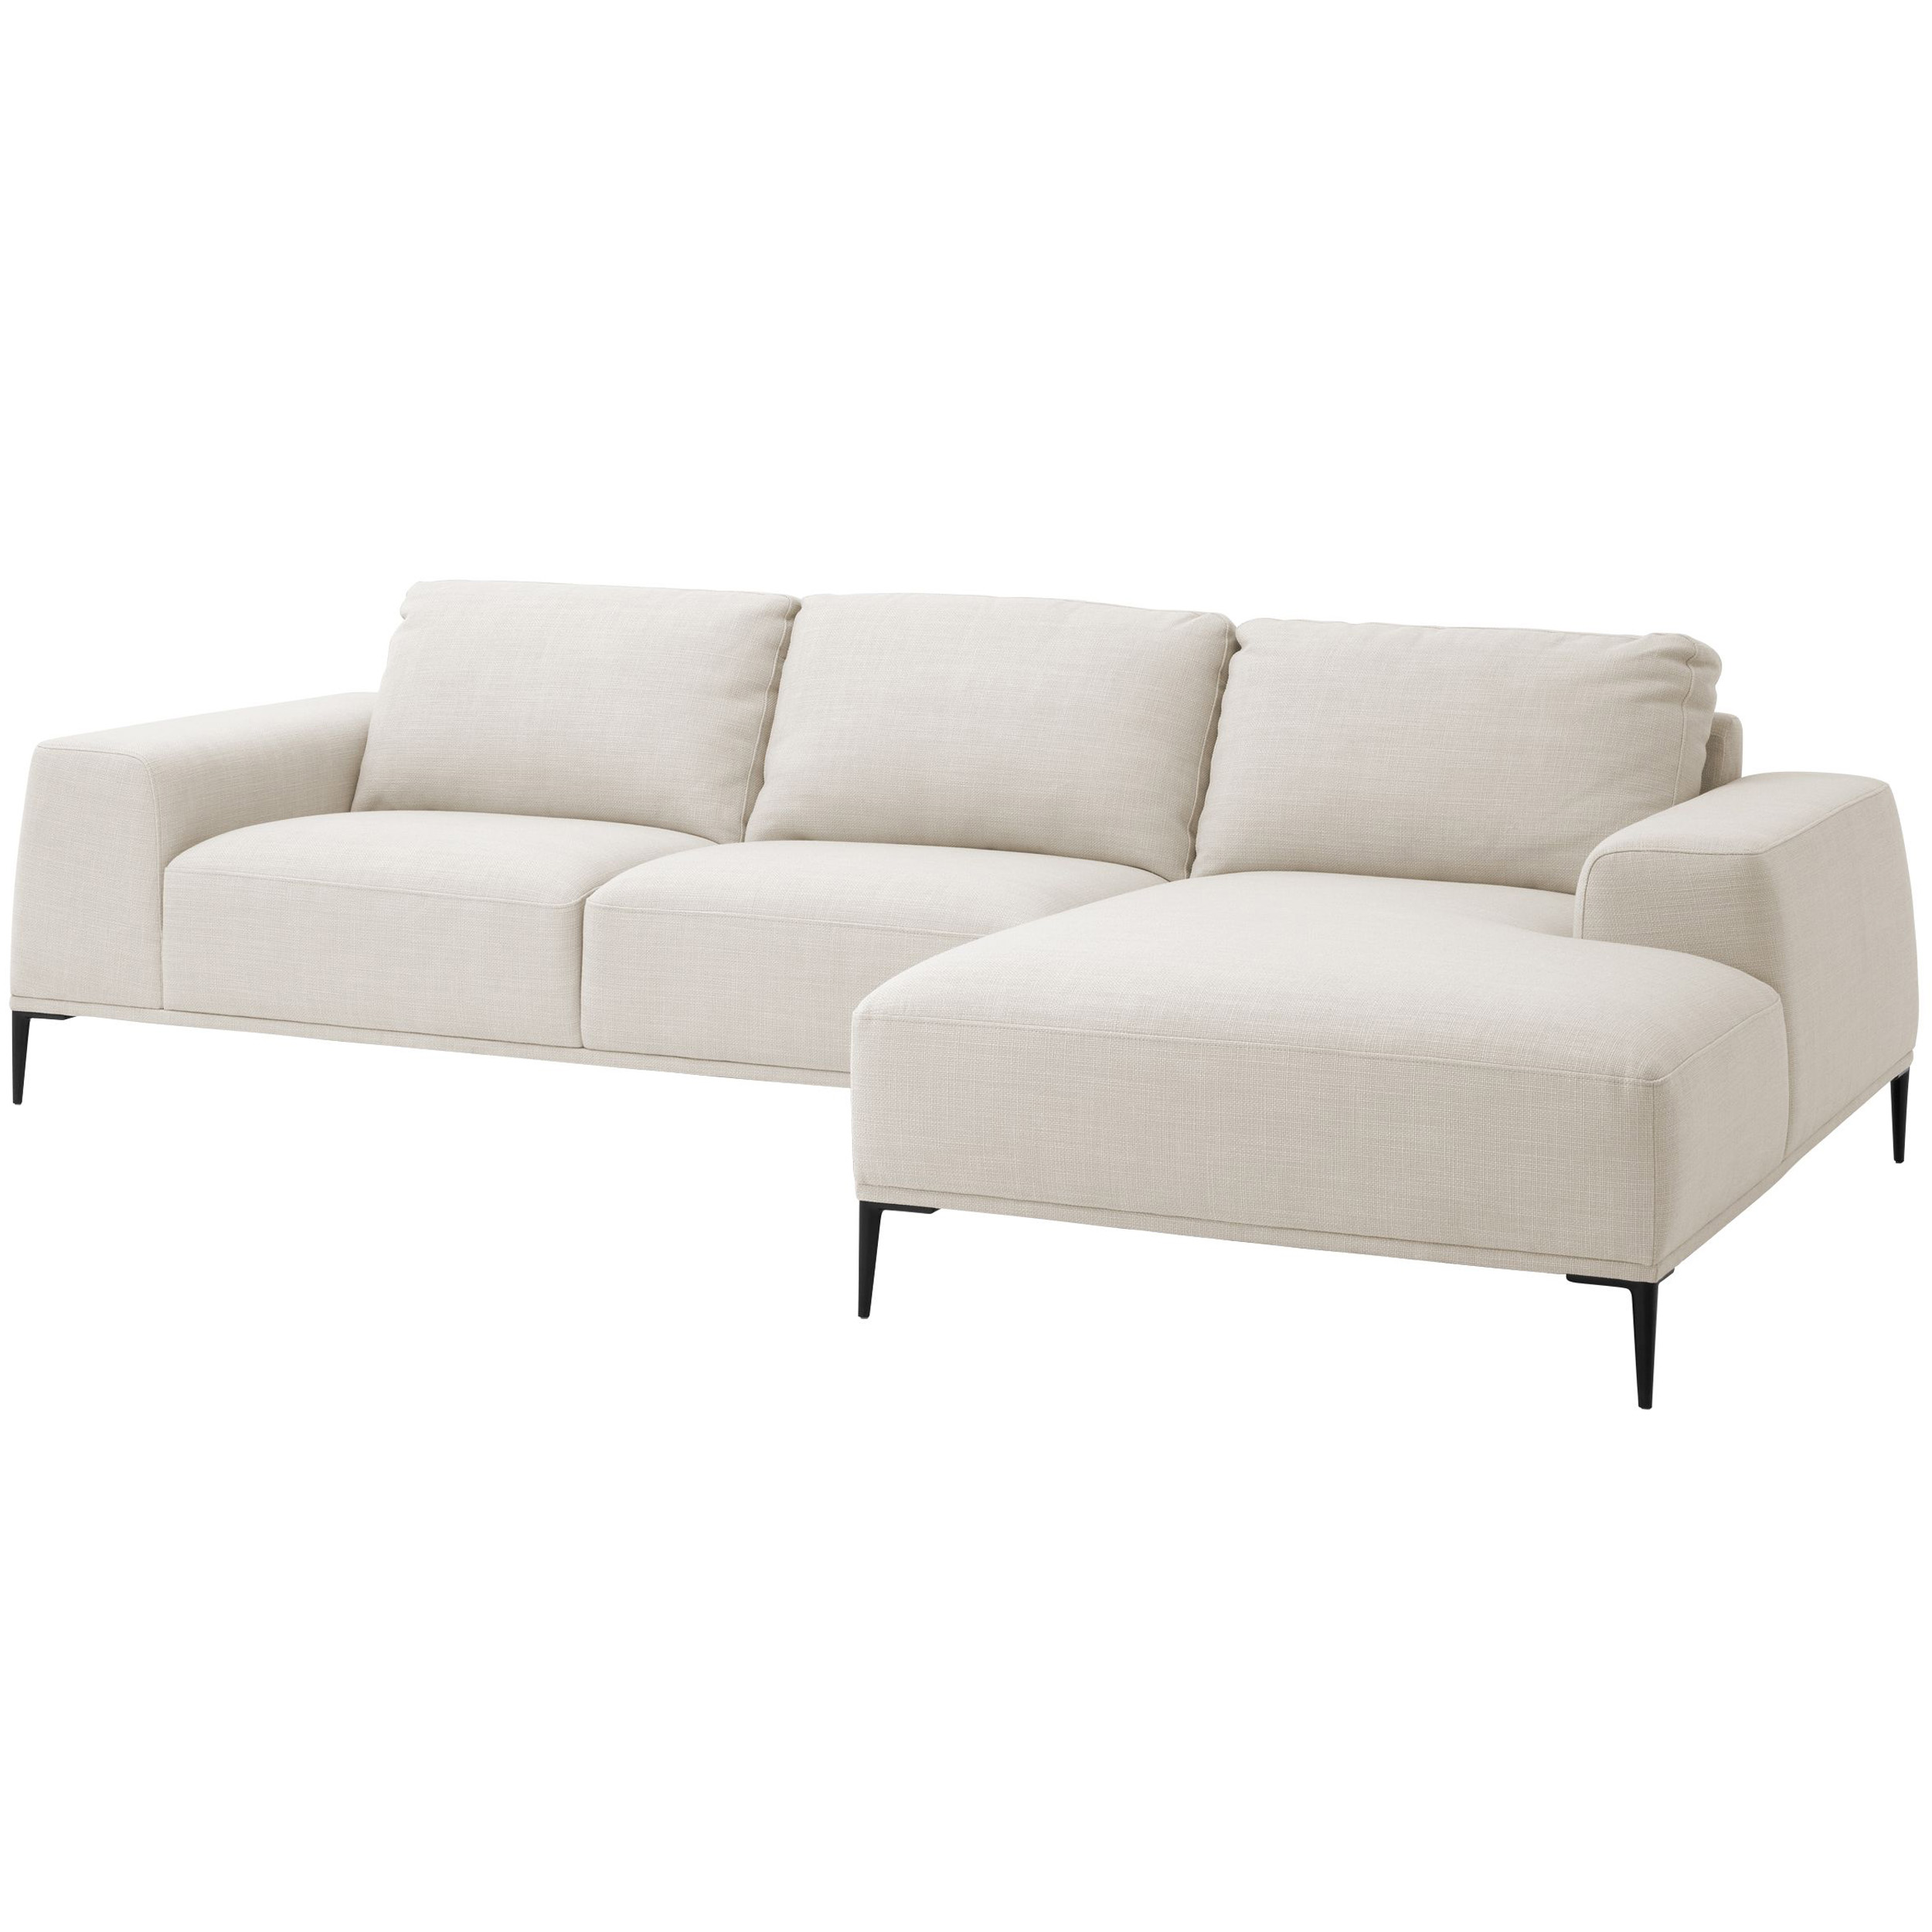 Sofa Atlas with Chaise